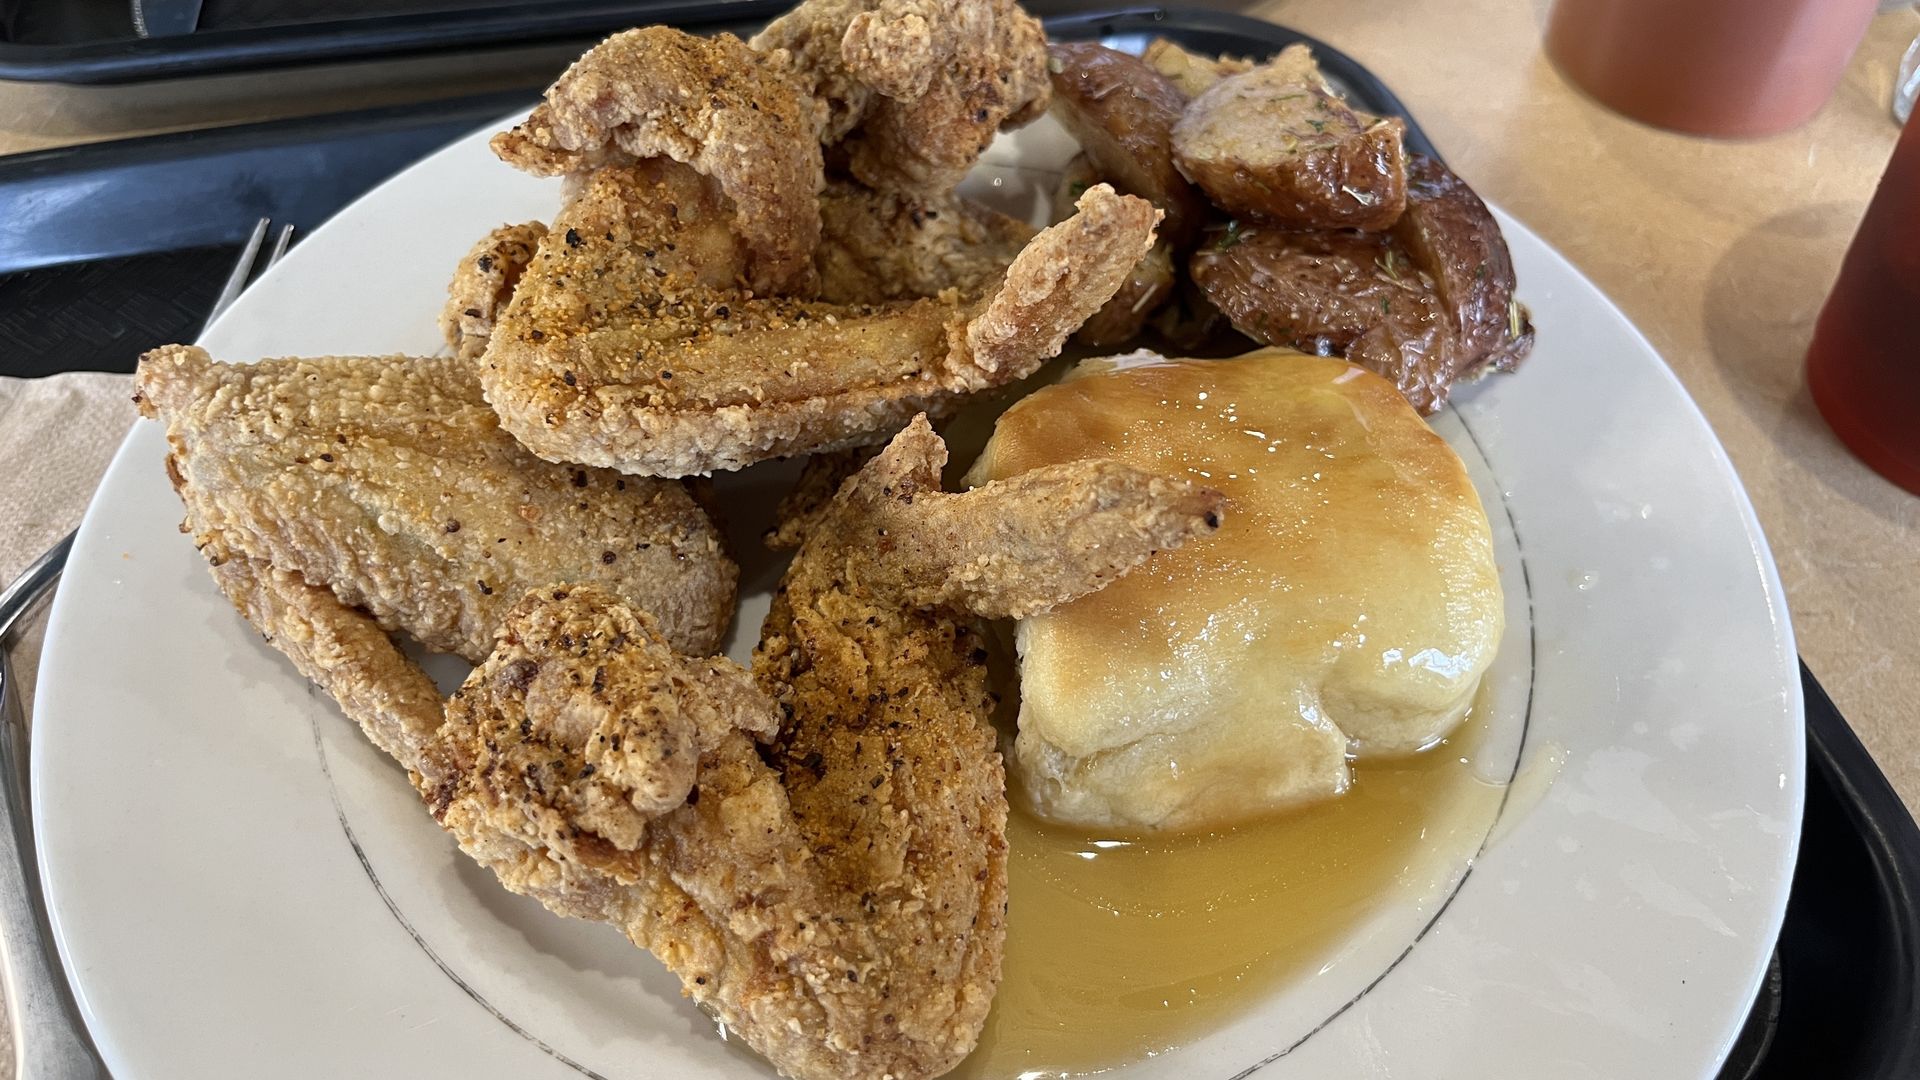 Chicken wings on a plate with a biscuit covered in honey.